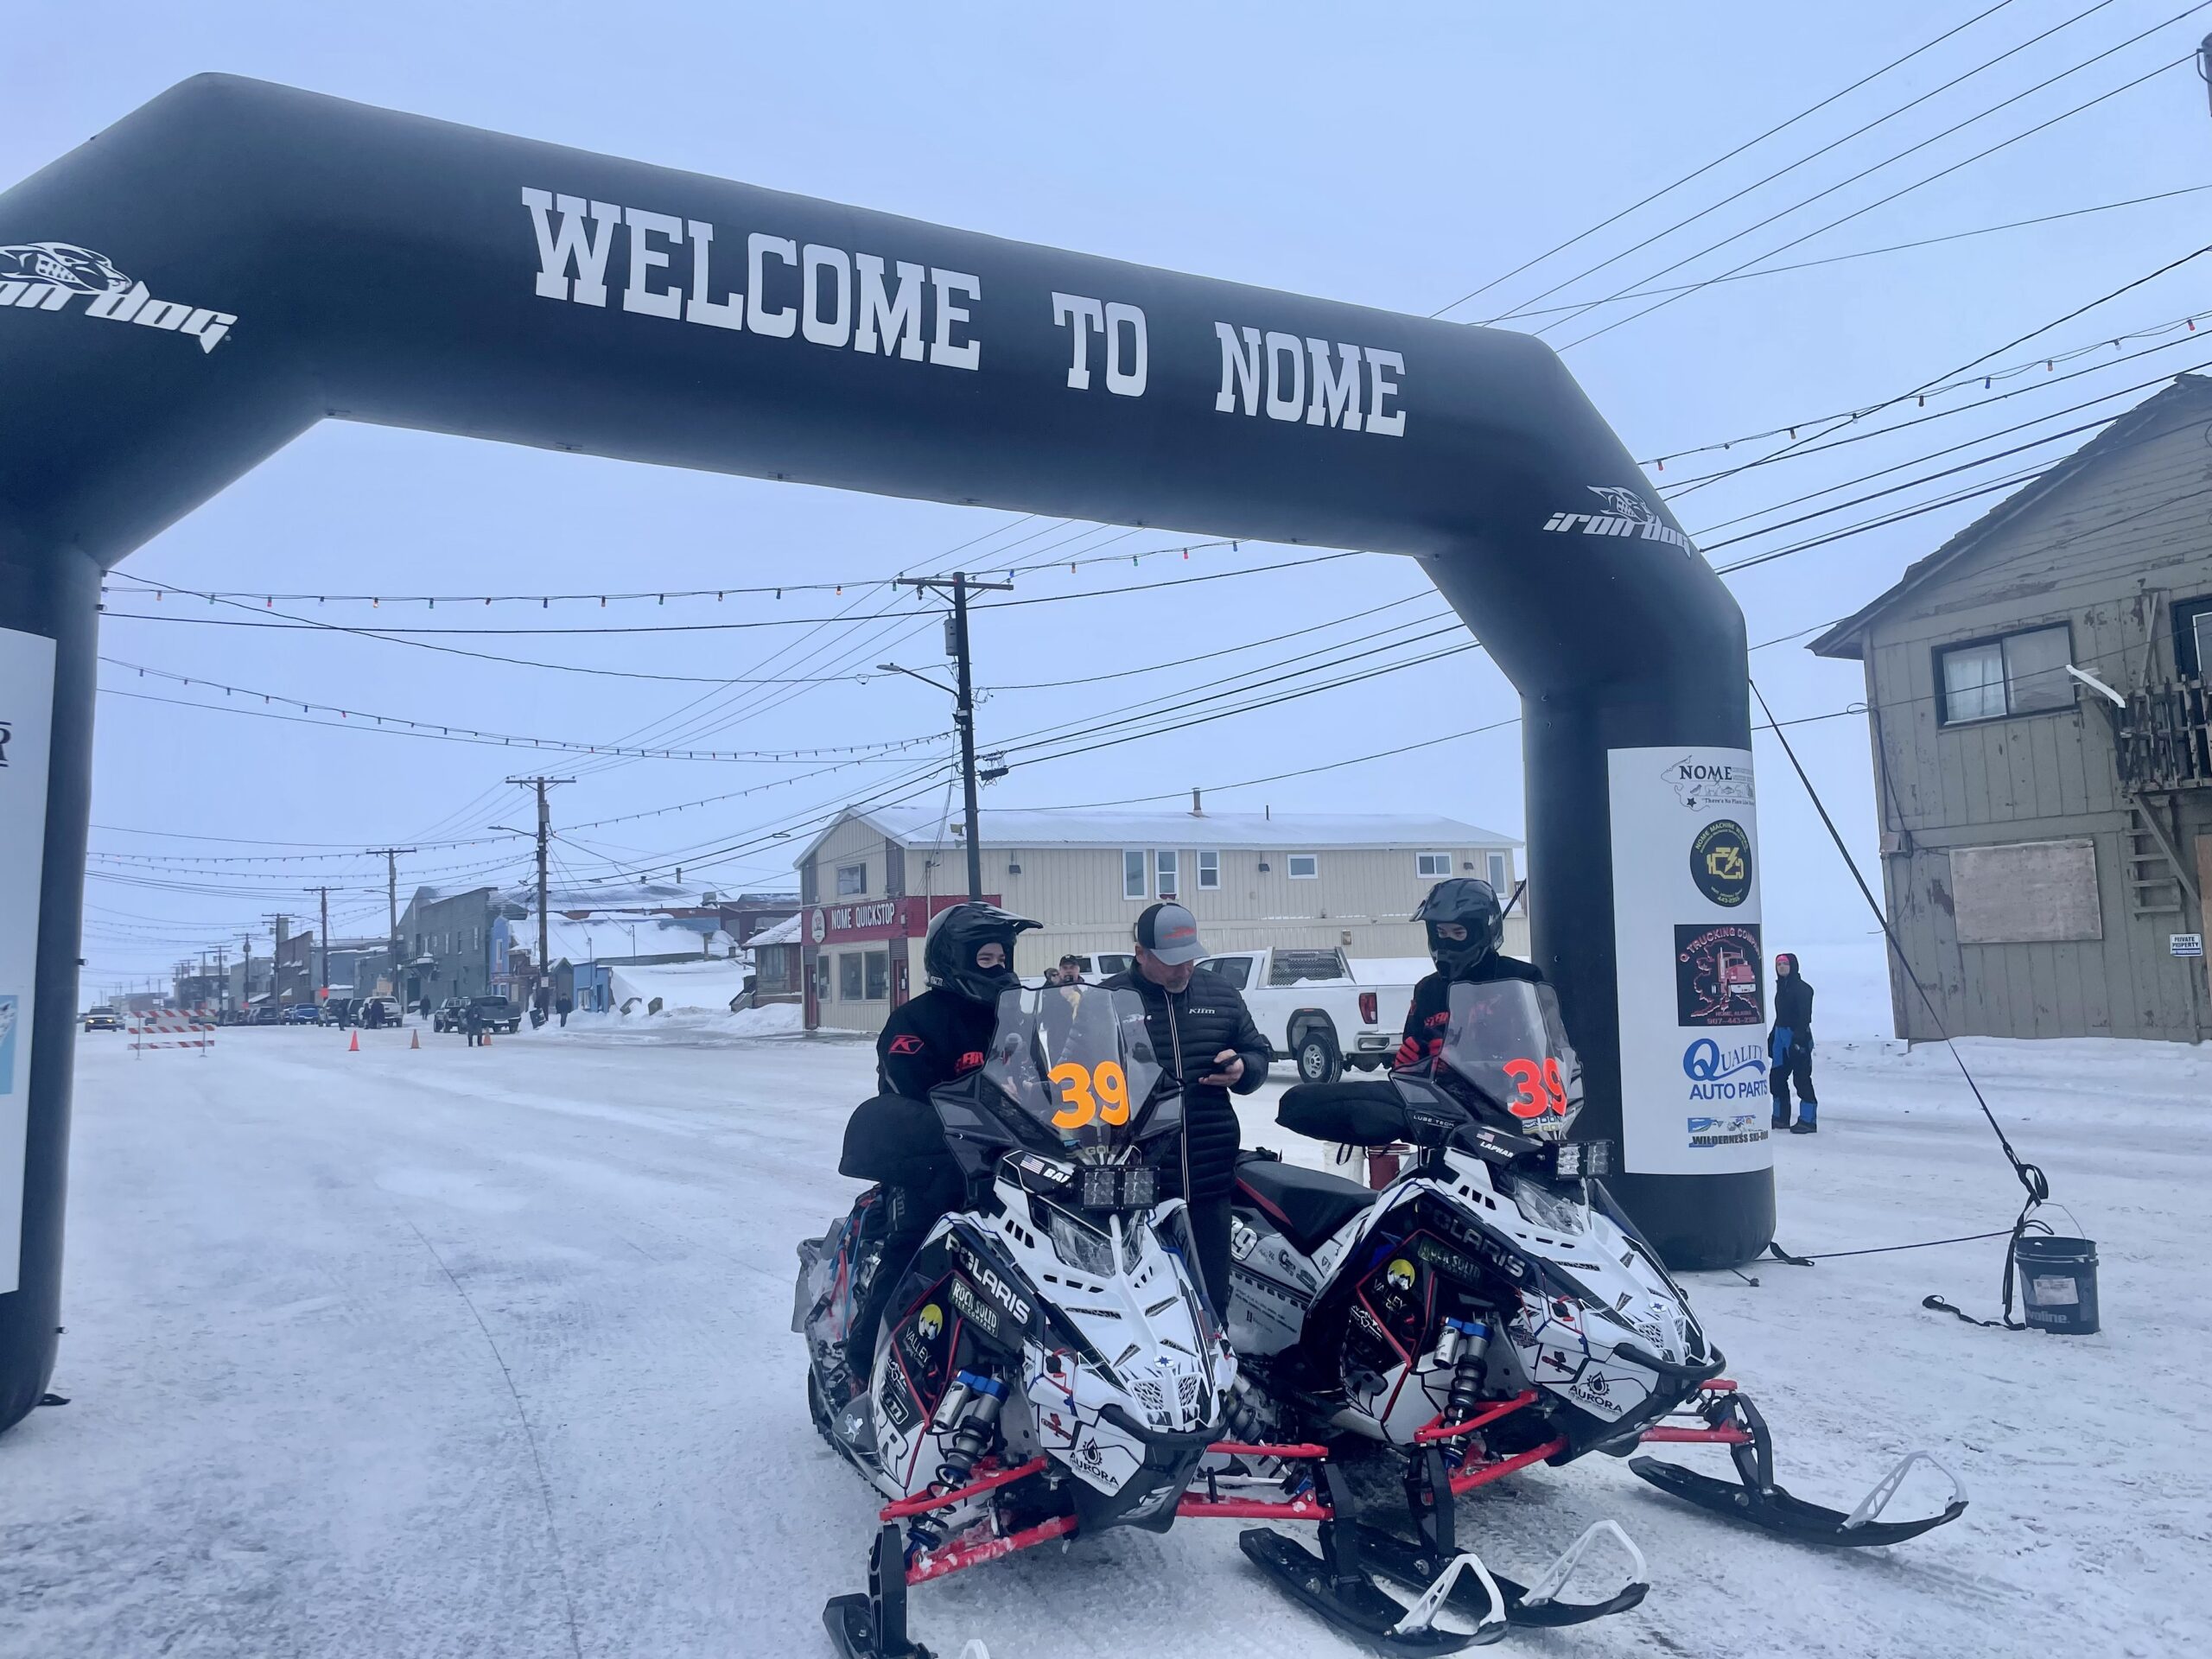 Team 39 leads Iron Dog racers into Nome